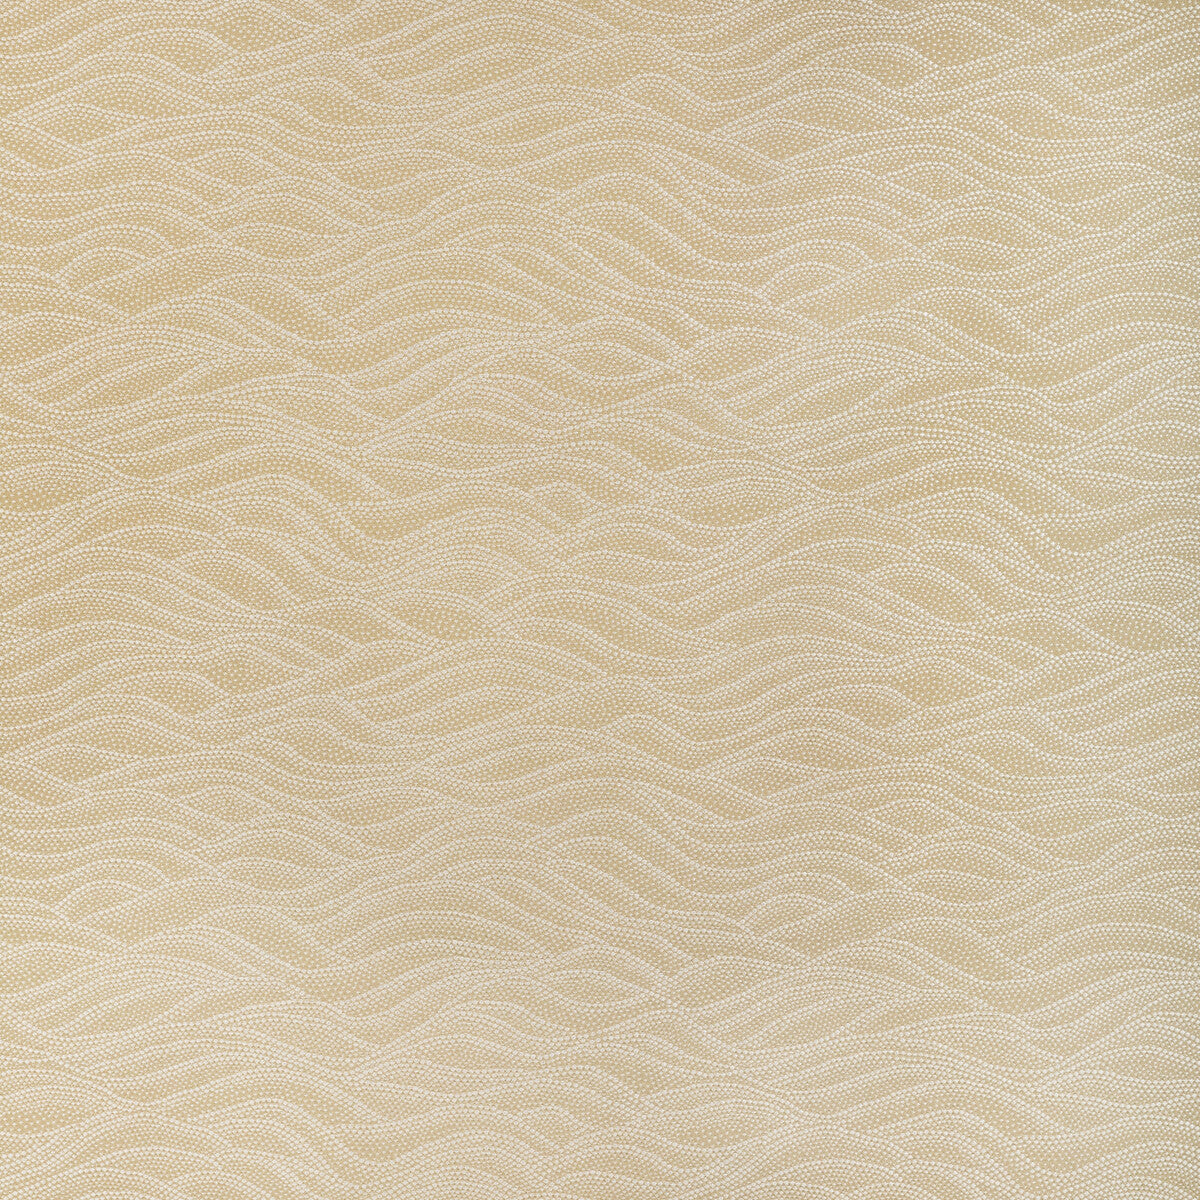 Sandcrest Weave fabric in sand color - pattern 36817.16.0 - by Kravet Design in the Candice Olson collection